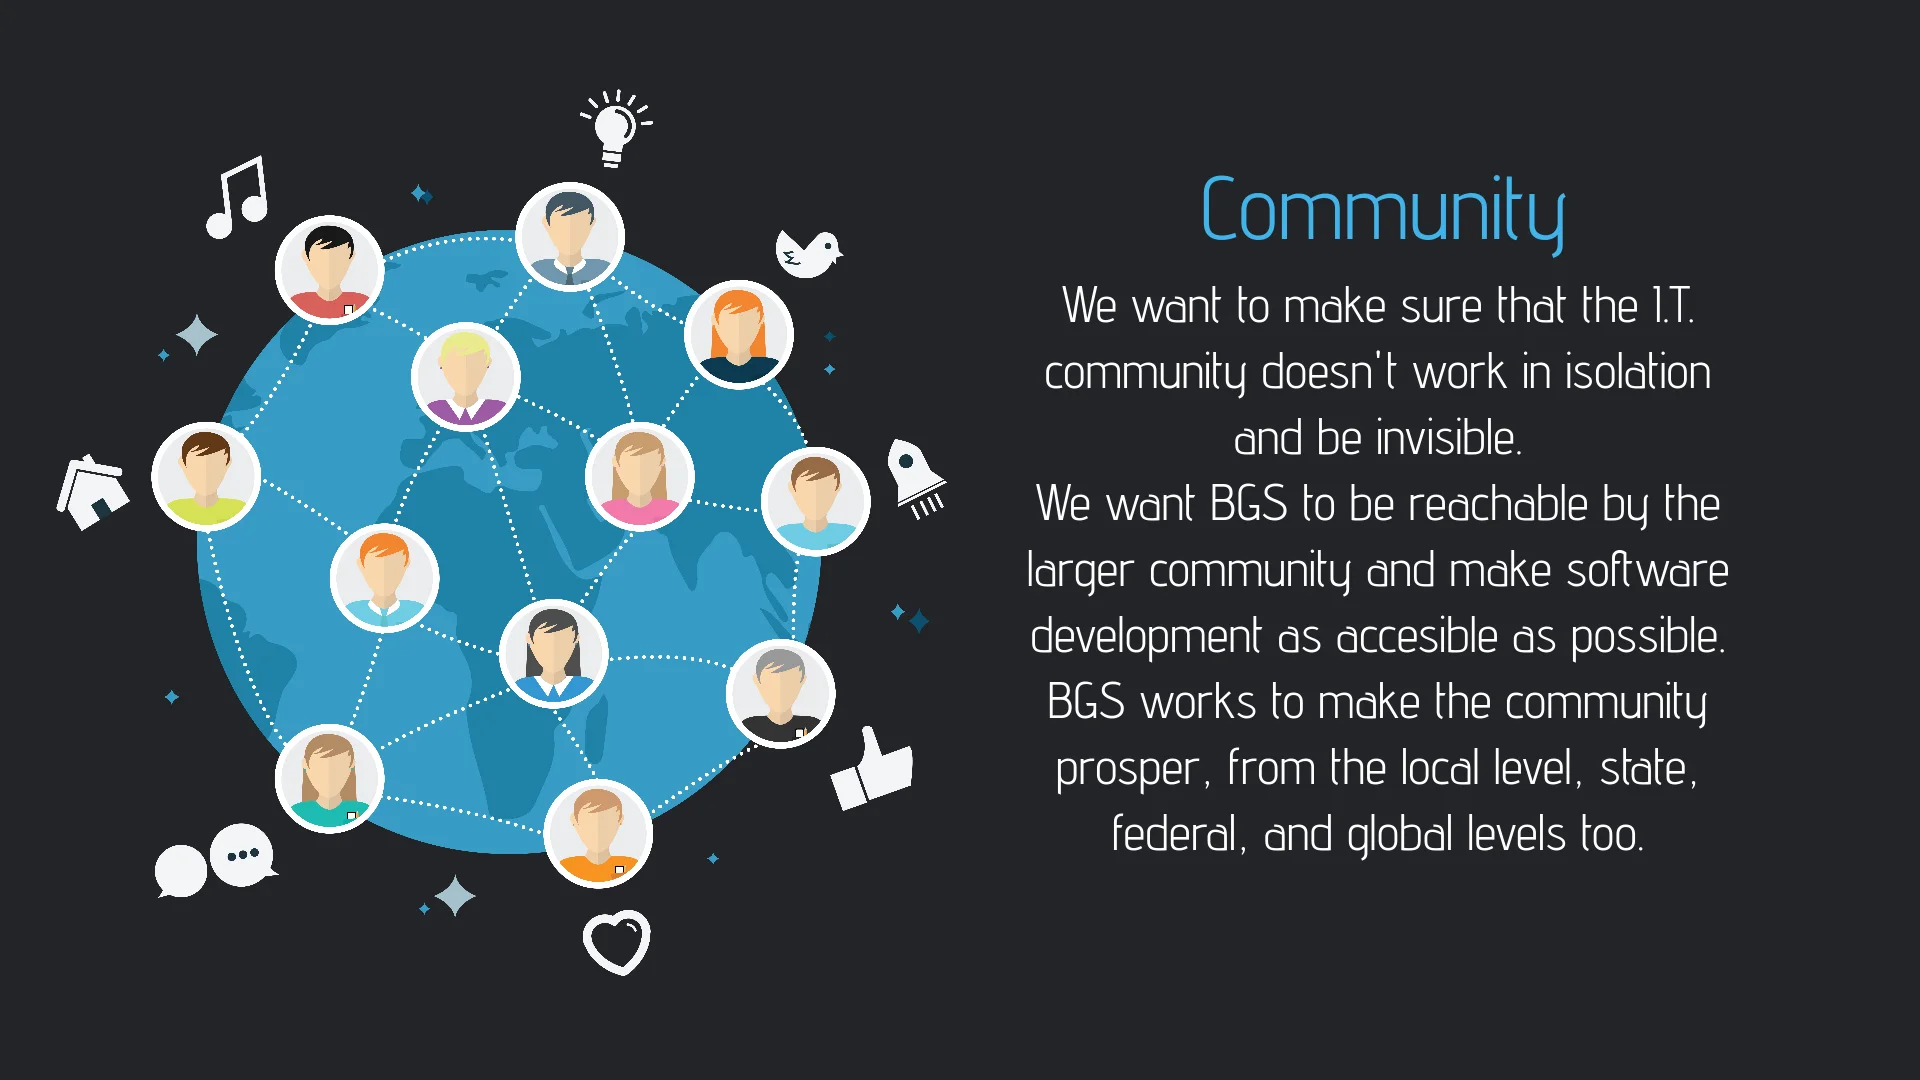 Image 4 with a paragraph about our core value: BGS works to make the community prosper, from the local level, state, federal, and global levels too.